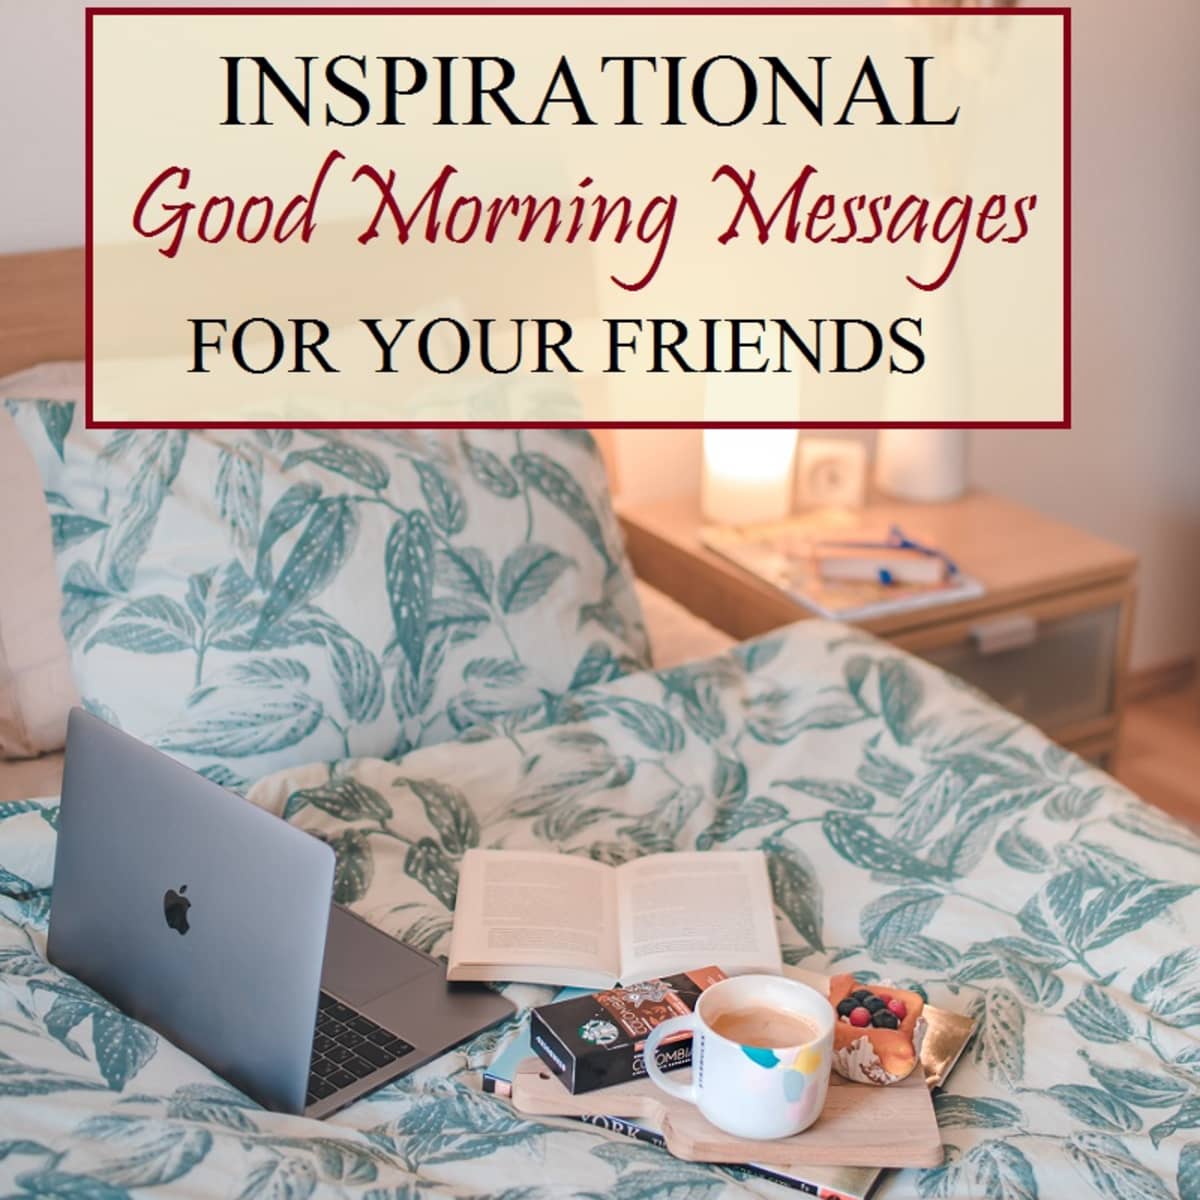 Inspirational Good Morning Messages for Friends - PairedLife